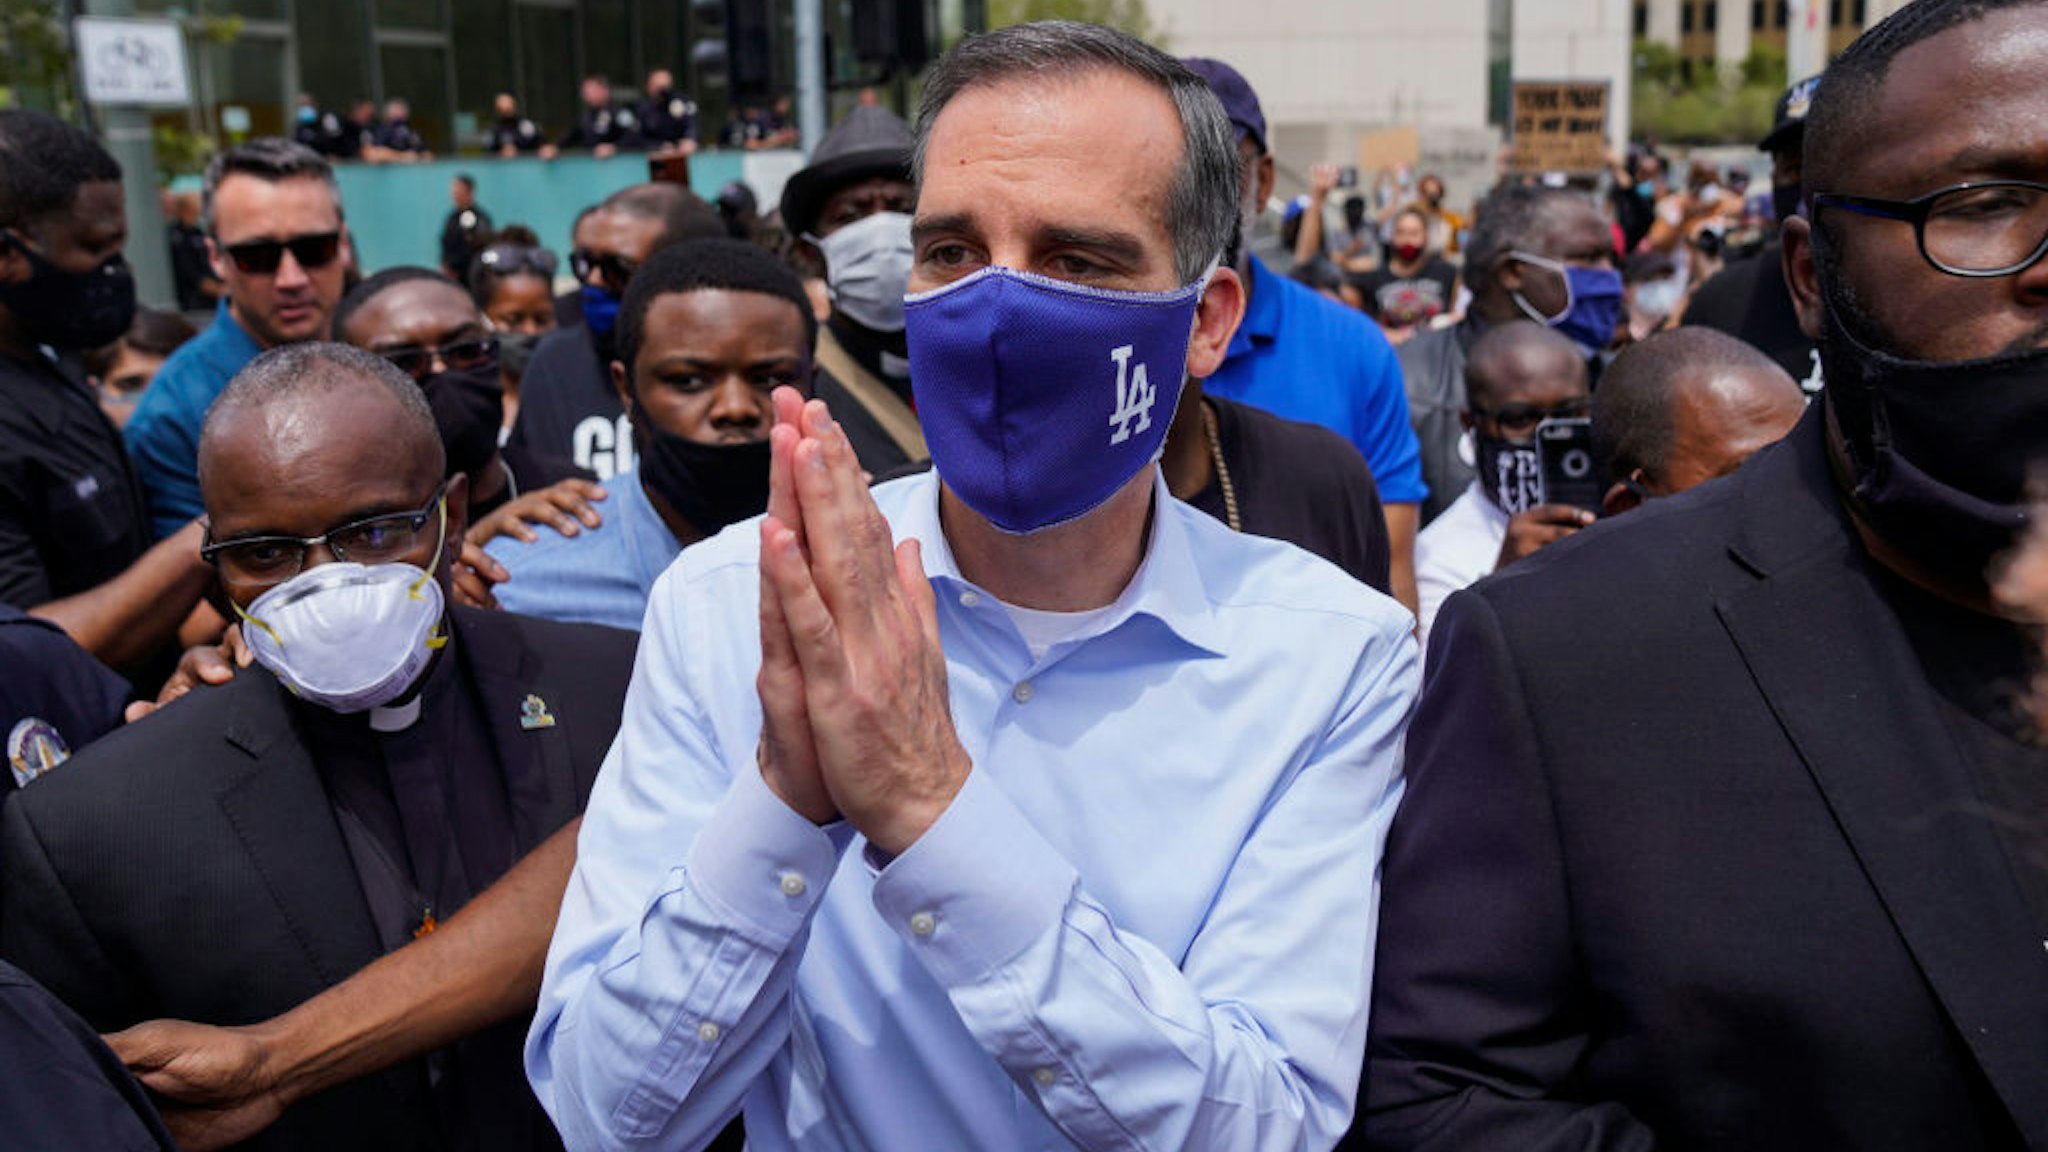 LOS ANGELES, CA - JUNE 02: LA Mayor Eric Garcetti walks out to address protesters and clergy members from the Los Angeles area that are participating in a march and peaceful protest in downtown Los Angeles outside of LA City Hall and LAPD Headquarters on Tuesday, June 2, 2020 in Los Angeles, CA. Protests erupted across the country, with people outraged over the death of George Floyd, a black man killed after a white Minneapolis police officer pinned him to the ground with his knee. (Kent Nishimura / Los Angeles Times via Getty Images)